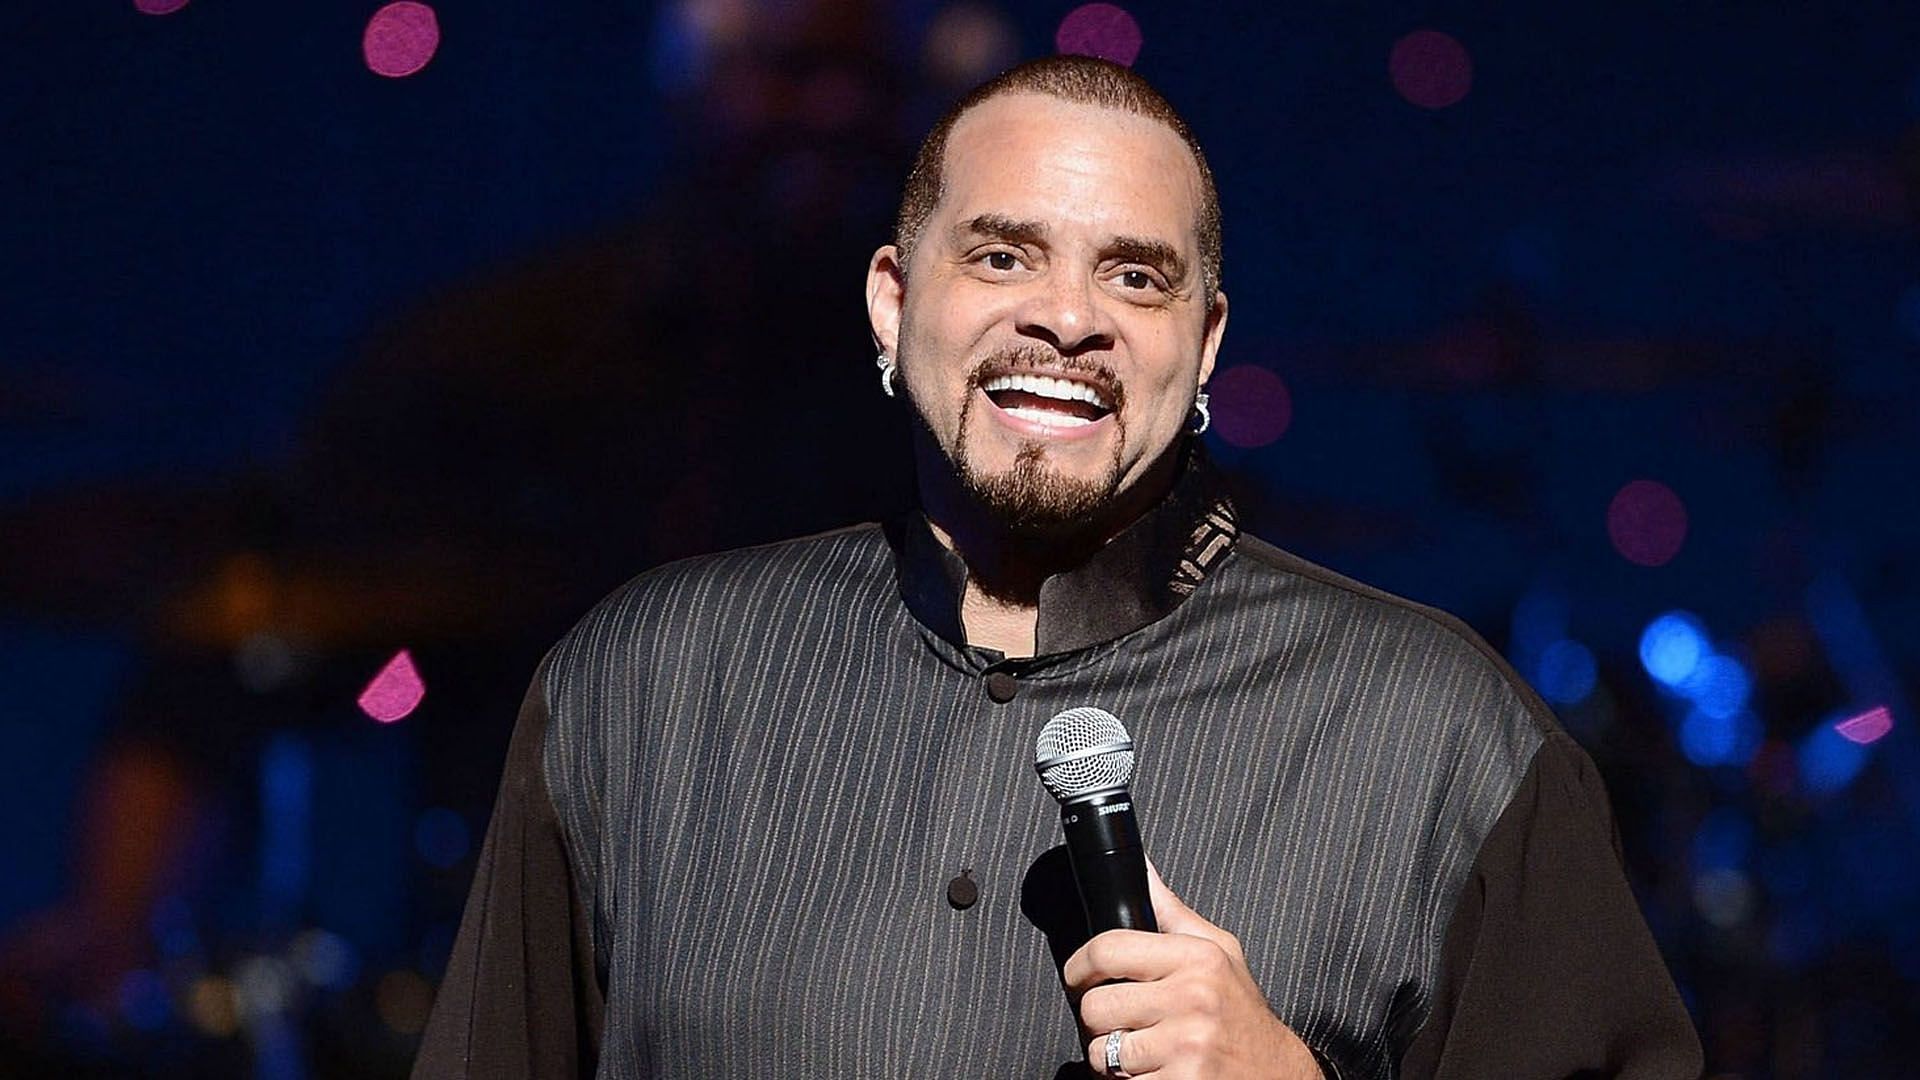 Sinbad learning to walk again after a life-changing stroke (image via Getty Images)